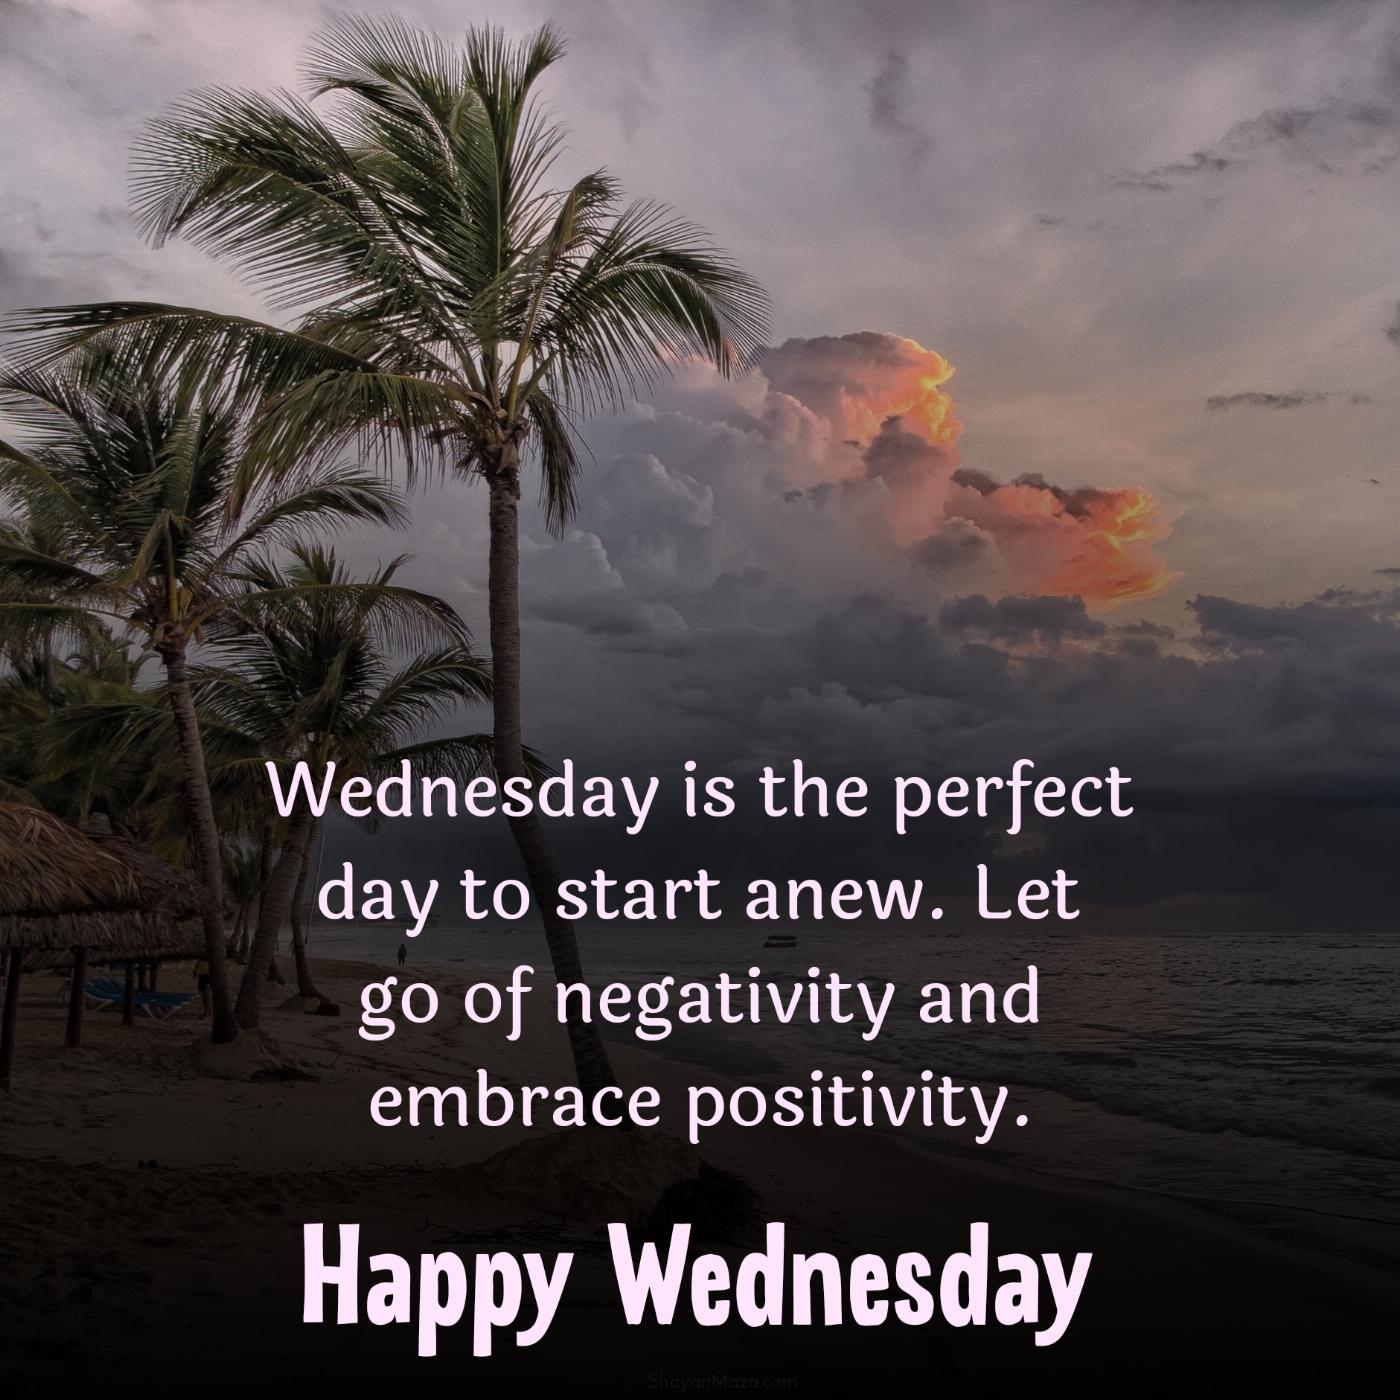 Wednesday is the perfect day to start anew